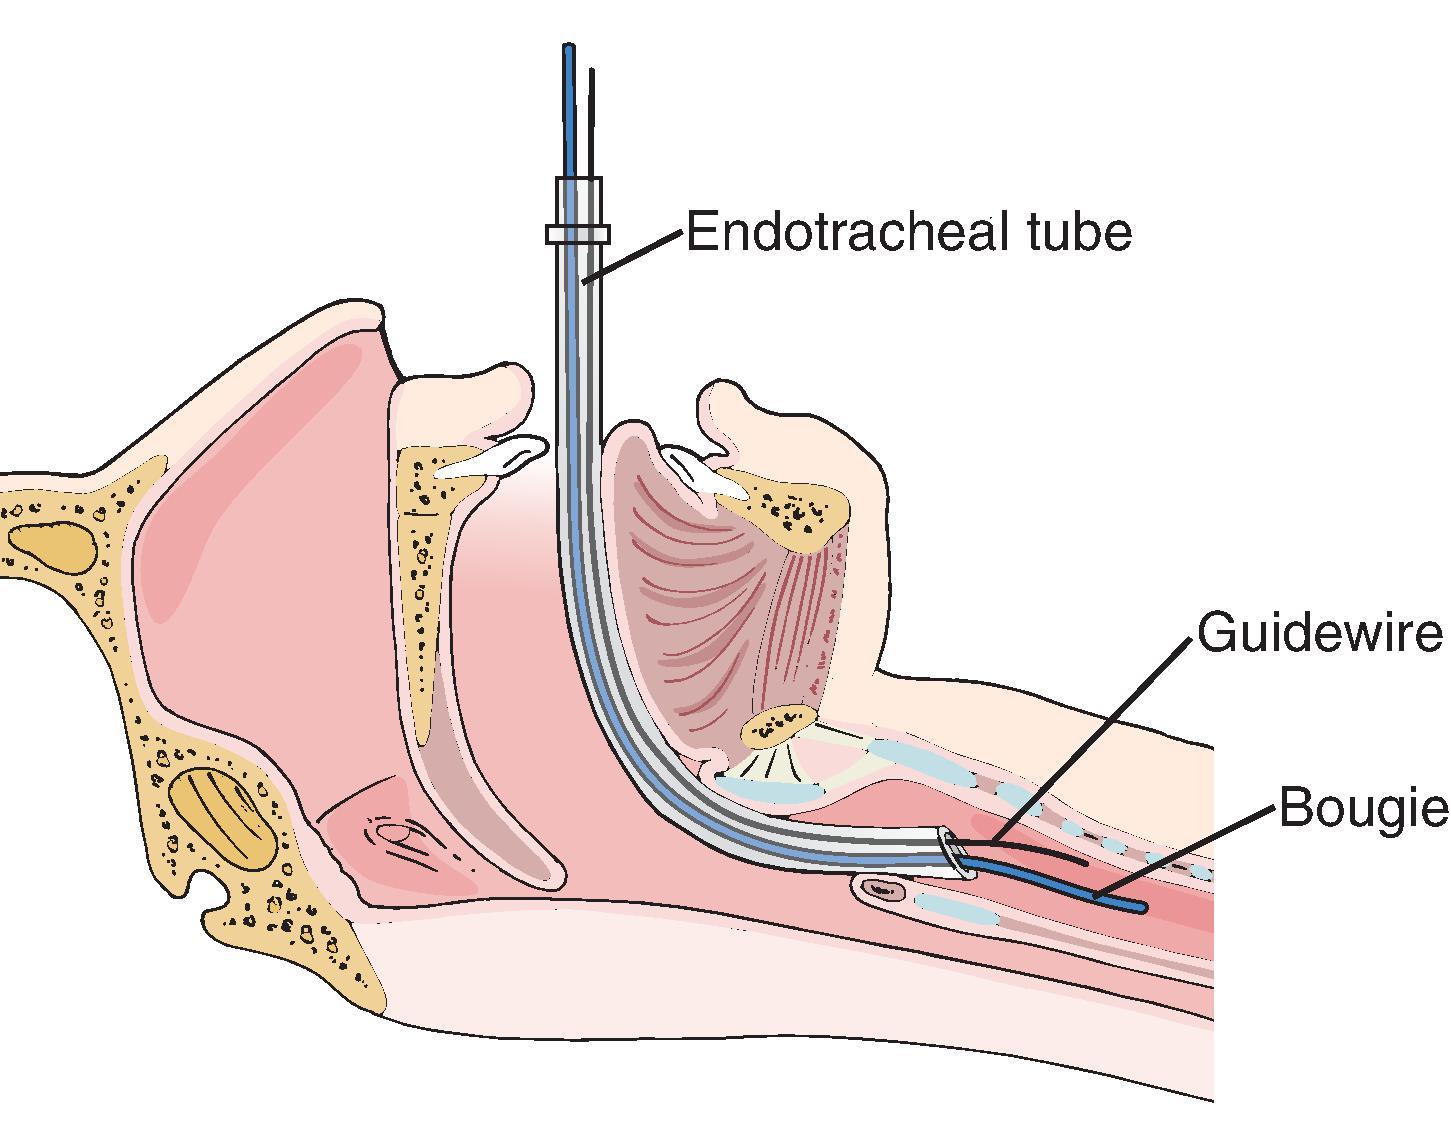 FIG. 5, Gum elastic bougie insertion. See text for explanation. (From Sandberg MD et al. The MGH Textbook of Anesthetic Equipment . Philadelphia: Elsevier; 2010.)